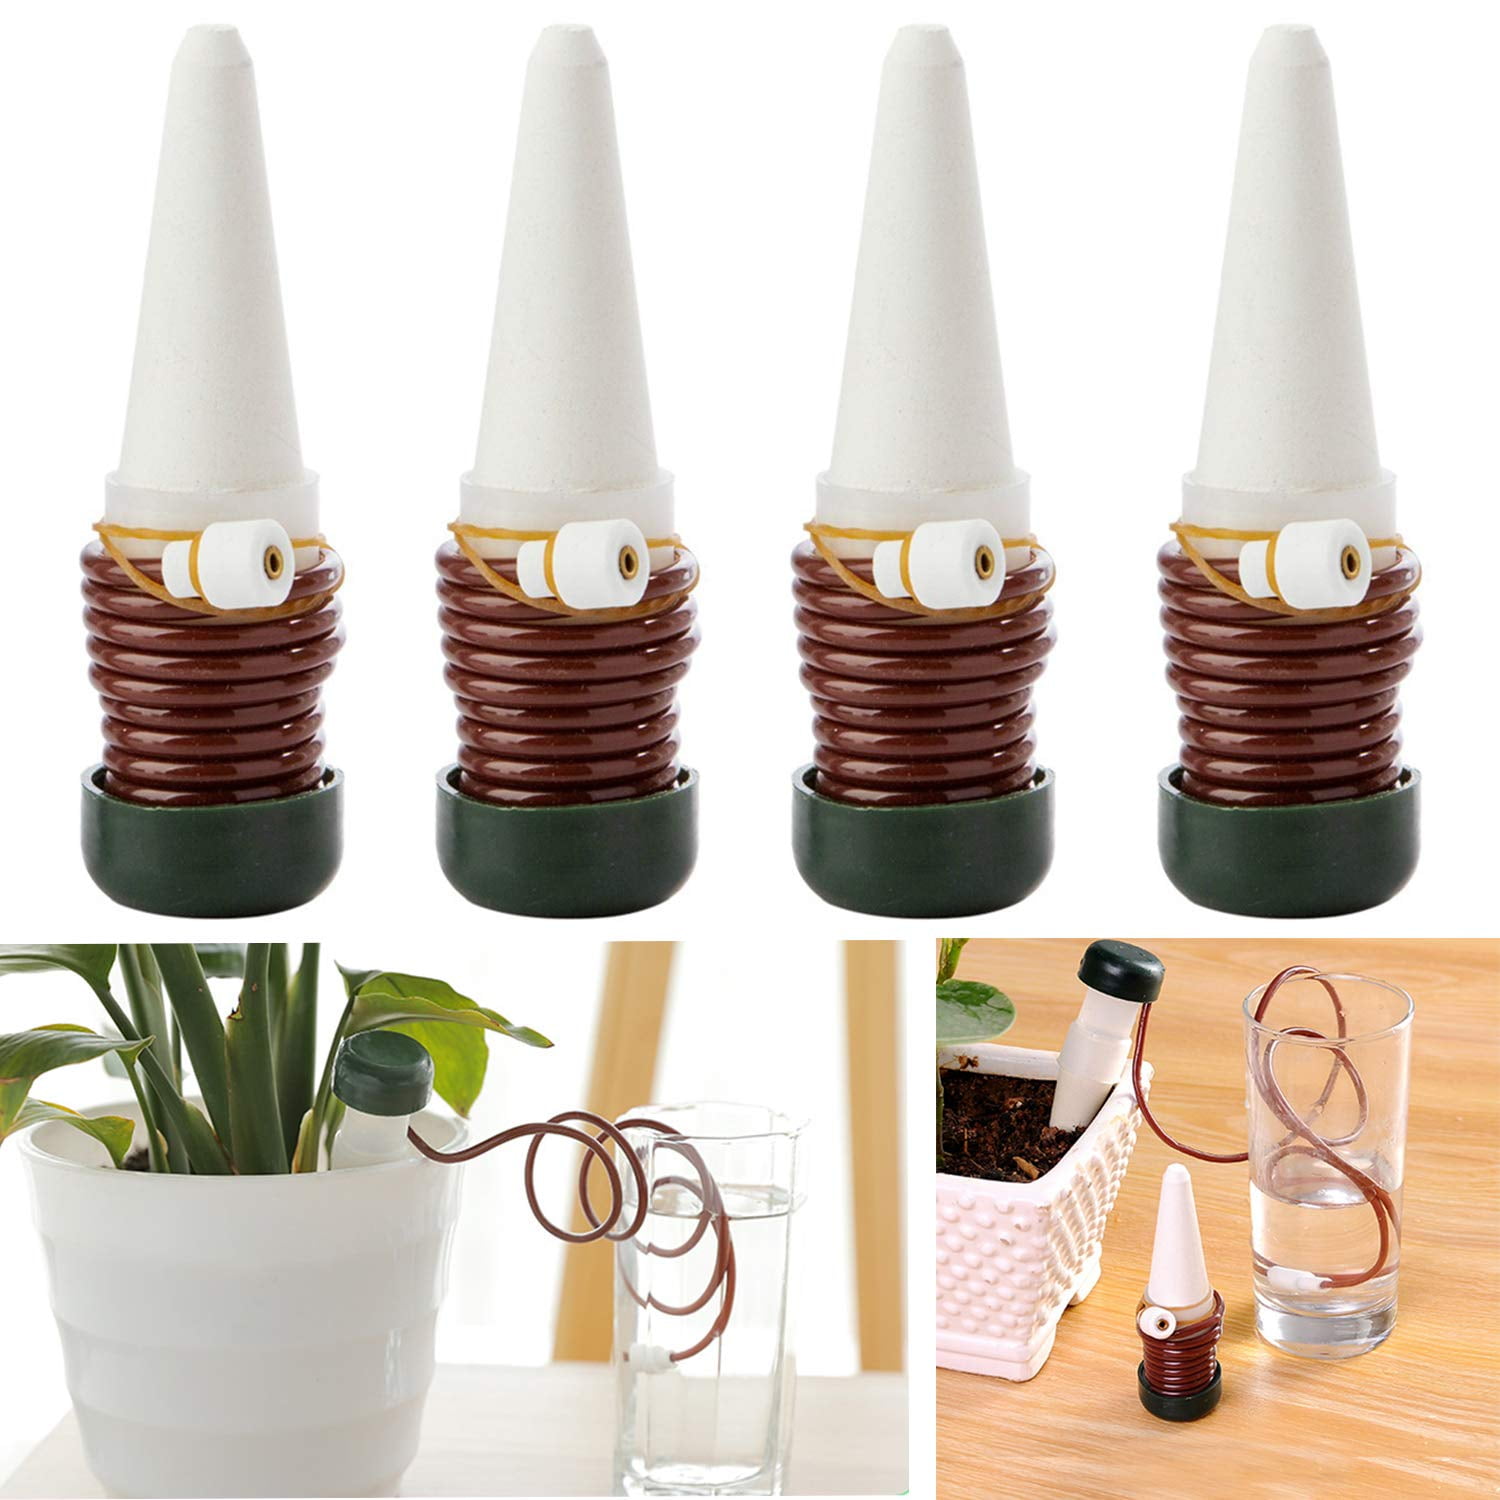 Automatic Vacation Plant Watering Devices,Terracotta Wine Bottle Stake Set Slow Release Self Irrigation Watering System-Perfect for Indoor Outdoor Plant punada Plant Water Self Watering Spikes 